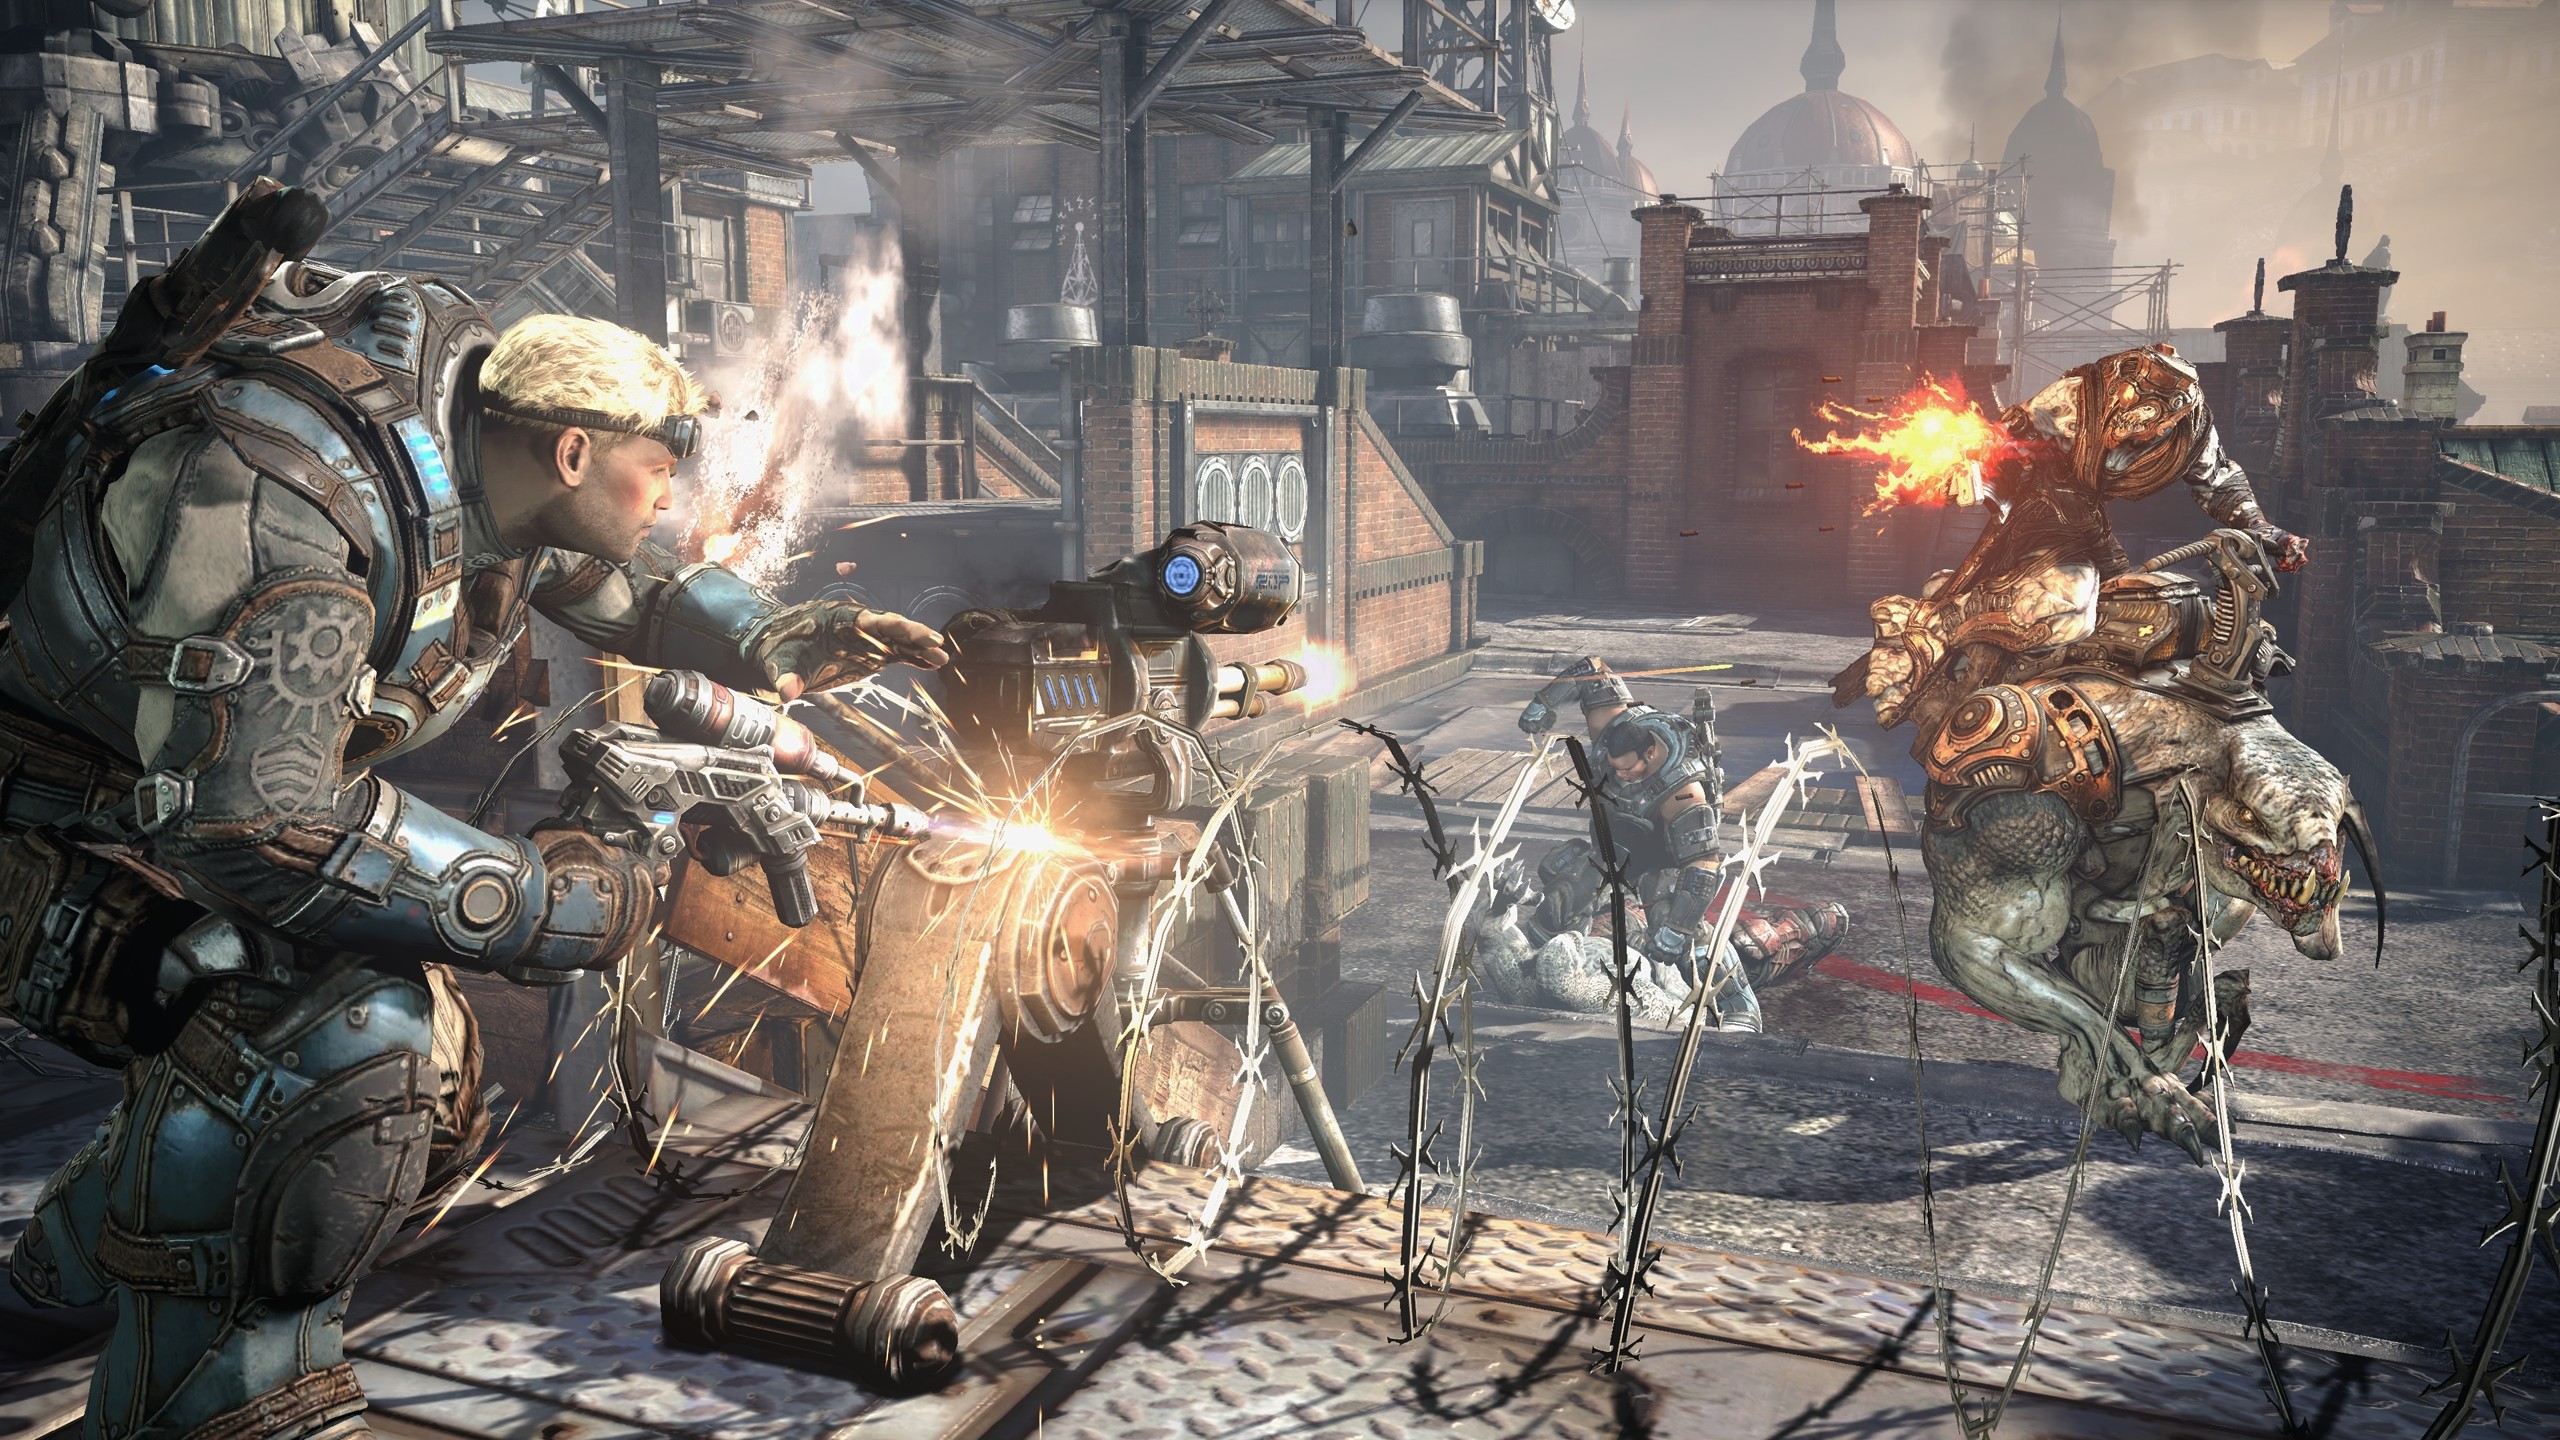 2560x1440 Gears of War: Judgment – See The “Classic Hammerburst” Pre-Order Video